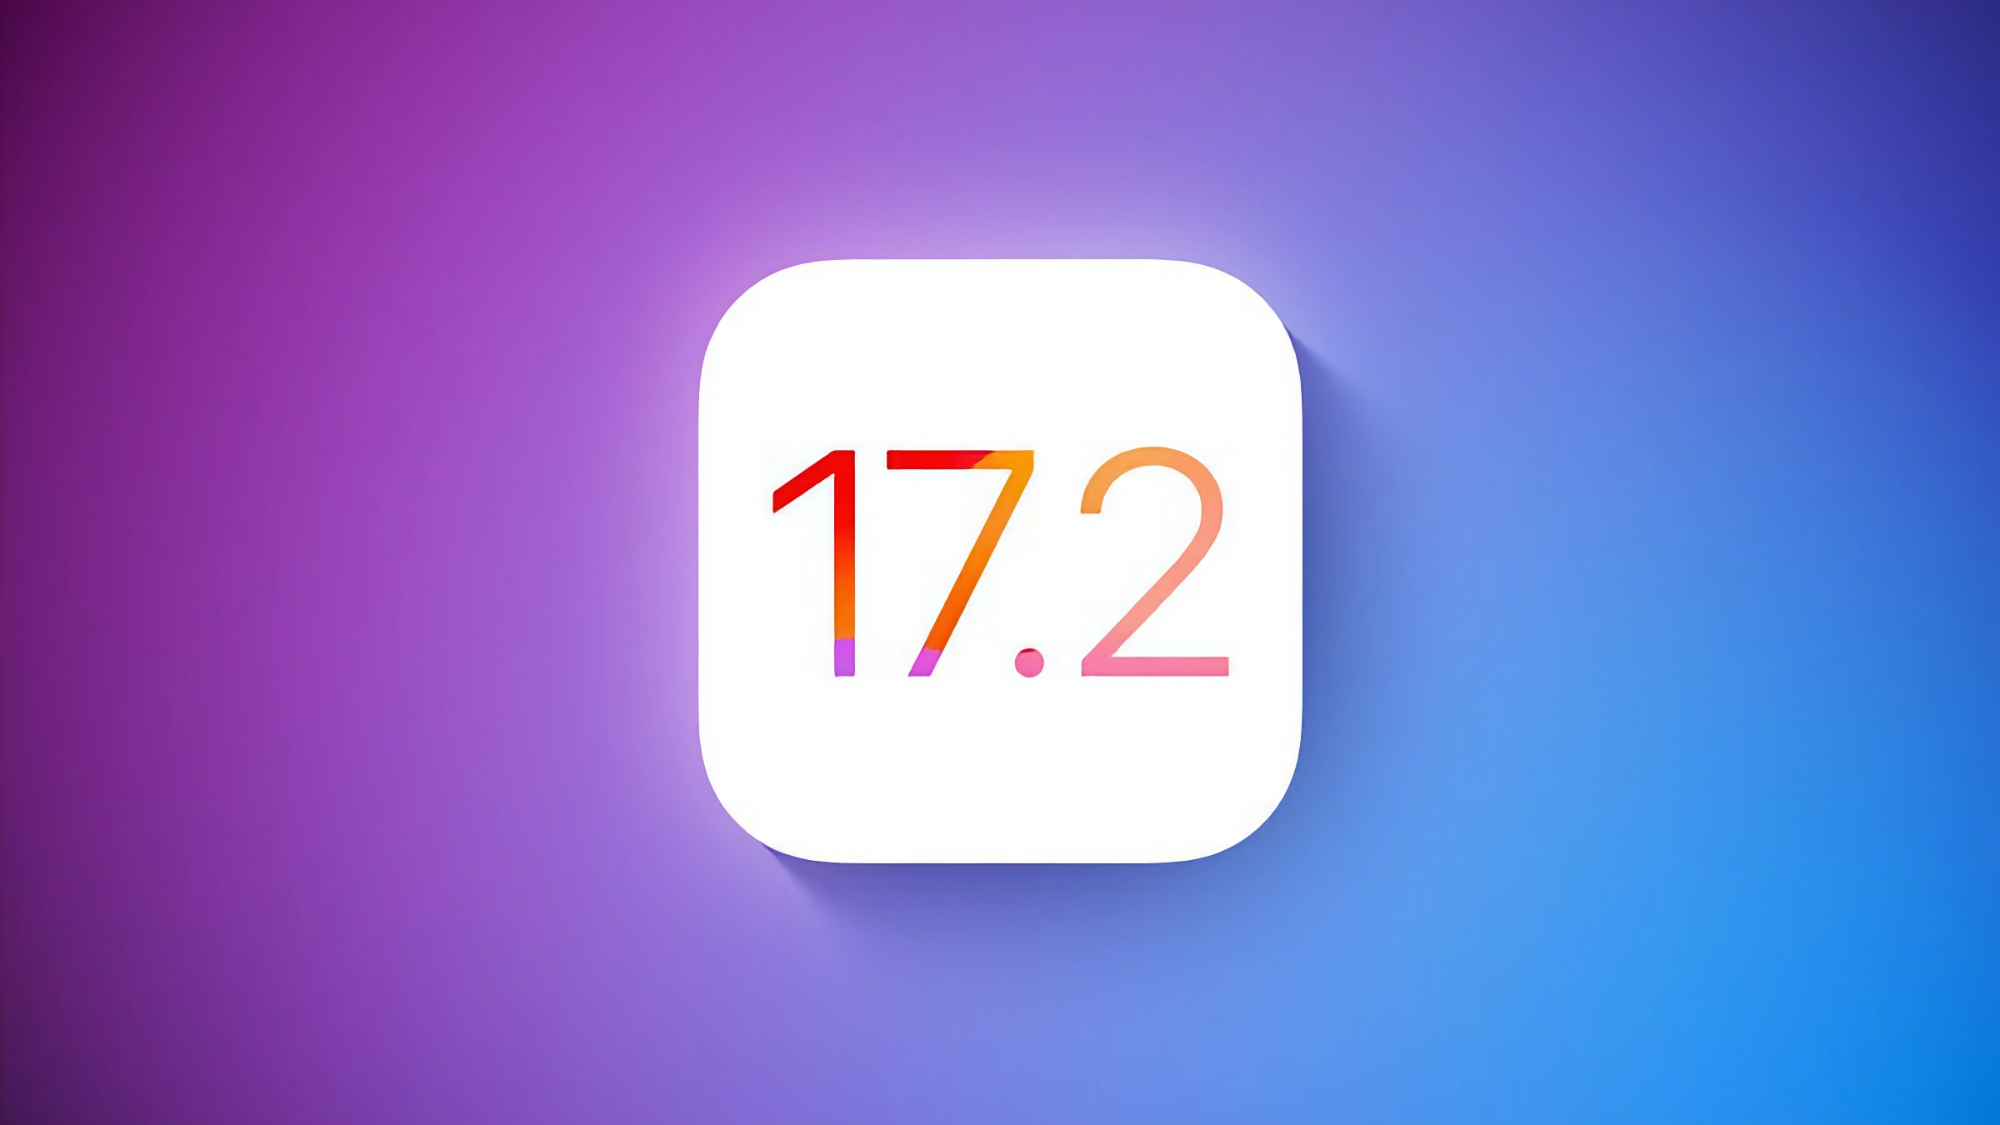 Apple has launched a pre-release version of iOS 17.2